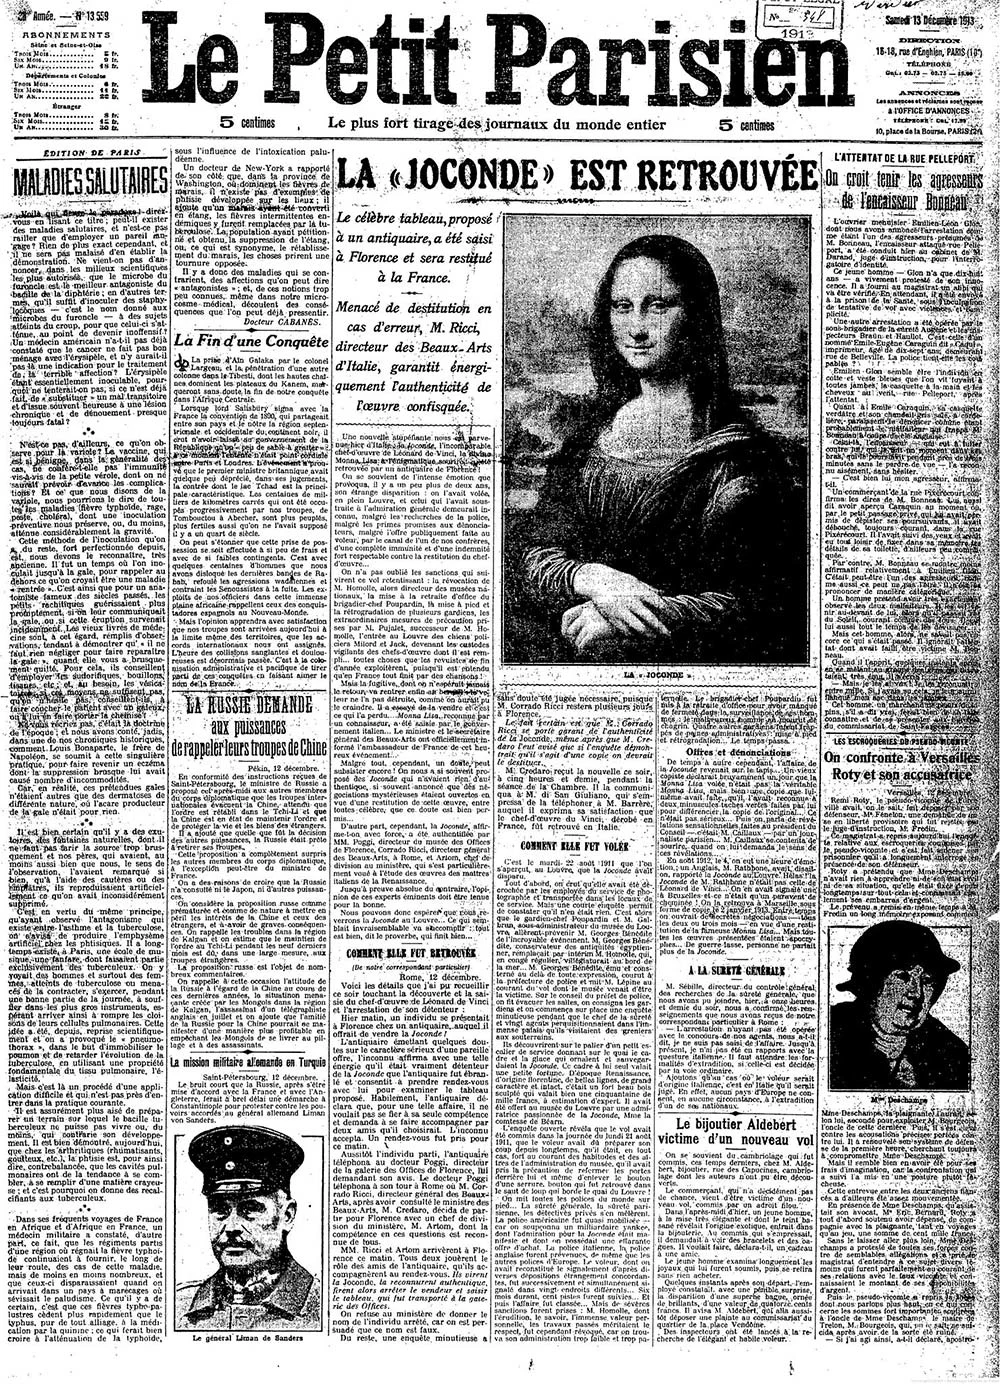 black and white scan of a newspaper front cover